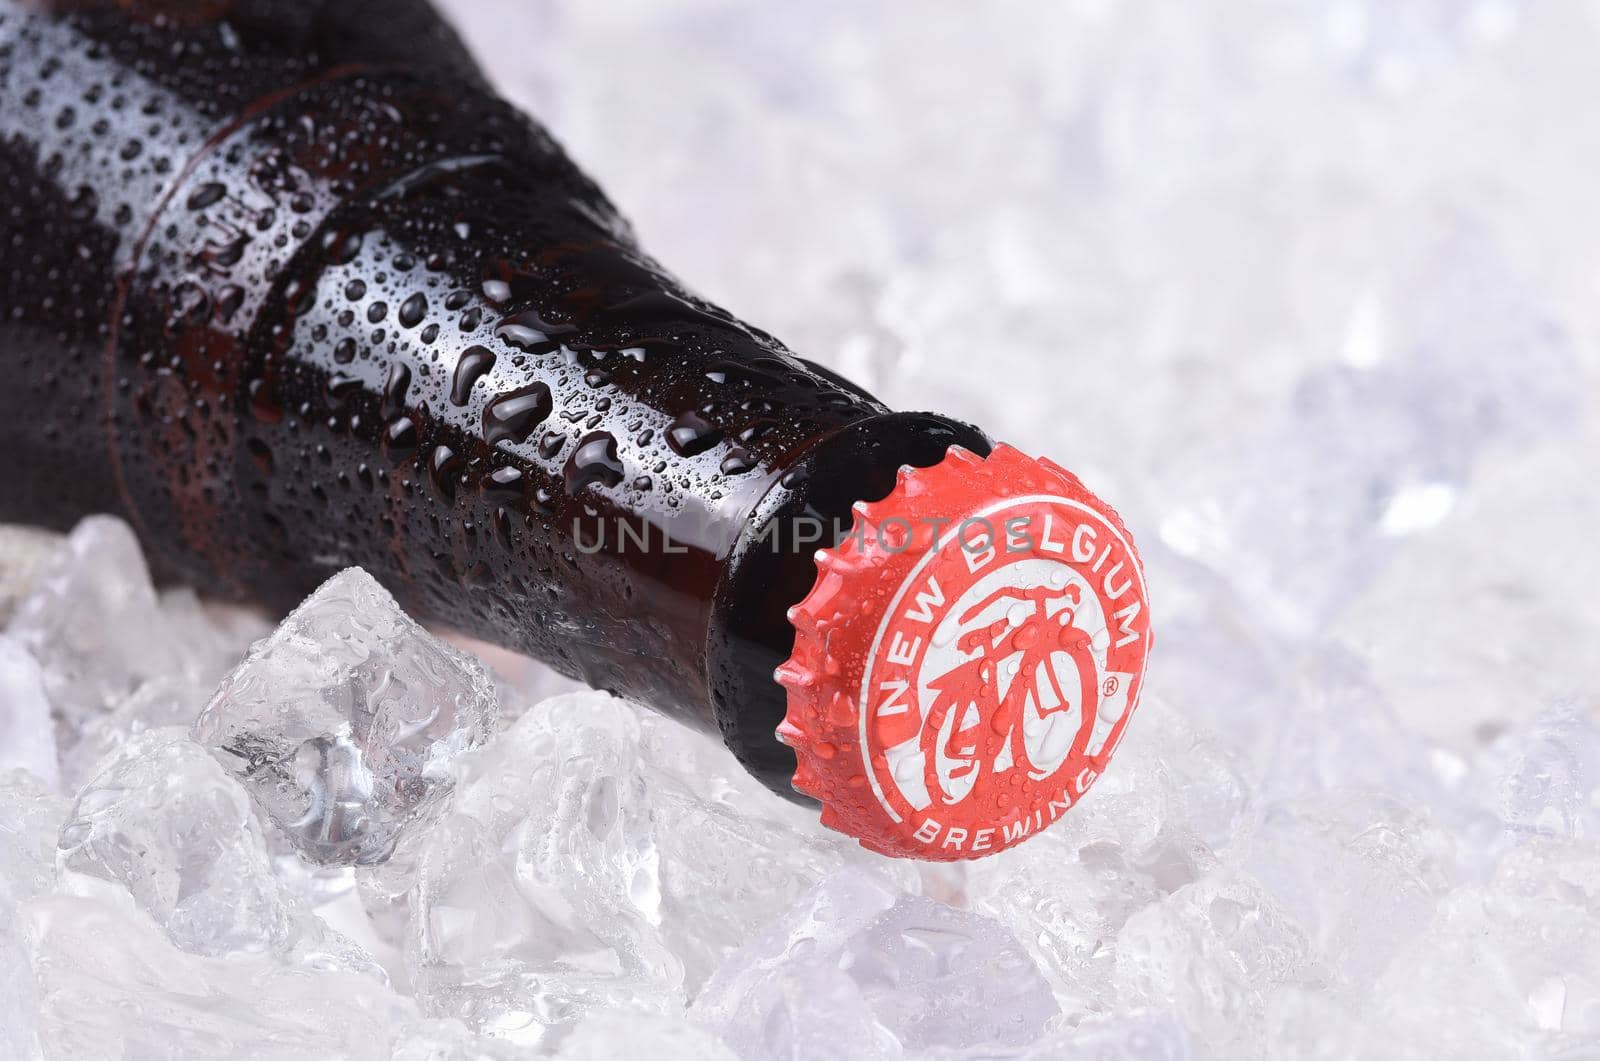 IRVINE, CALIFORNIA - December 14, 2017: Fat Tire Amber Ale bottle on ice. From the New Belgium Brewing Company, of Fort Collins, Colorado.